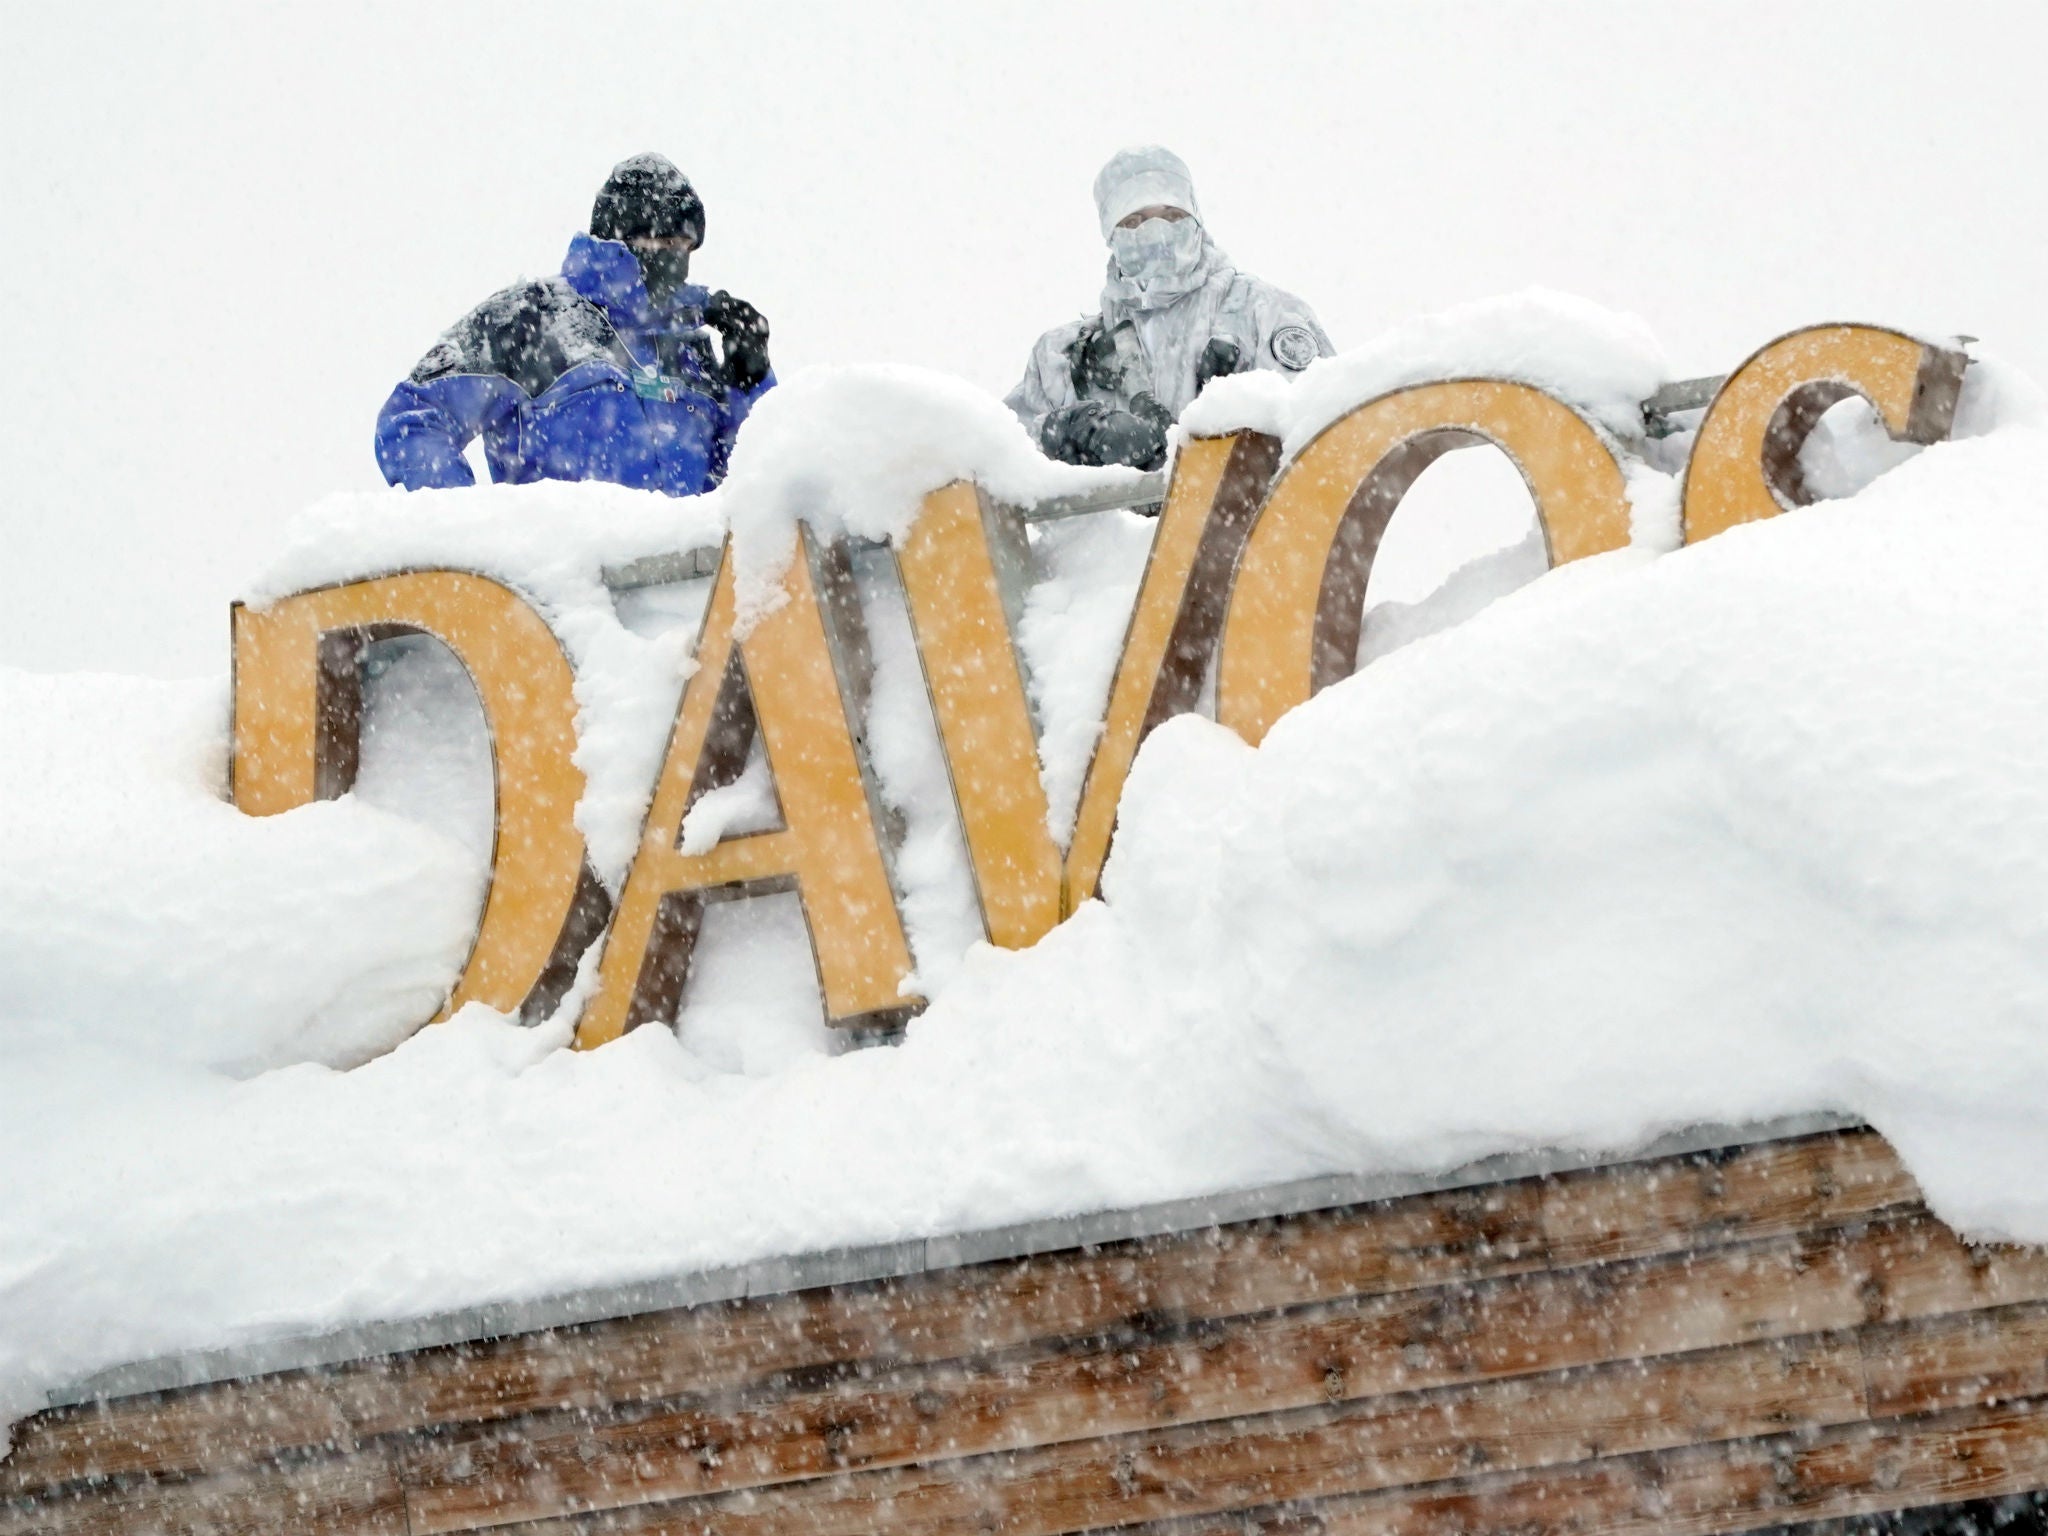 Snipers hold their position on the roof of a hotel during the World Economic Forum annual meeting in Davos, Switzerland